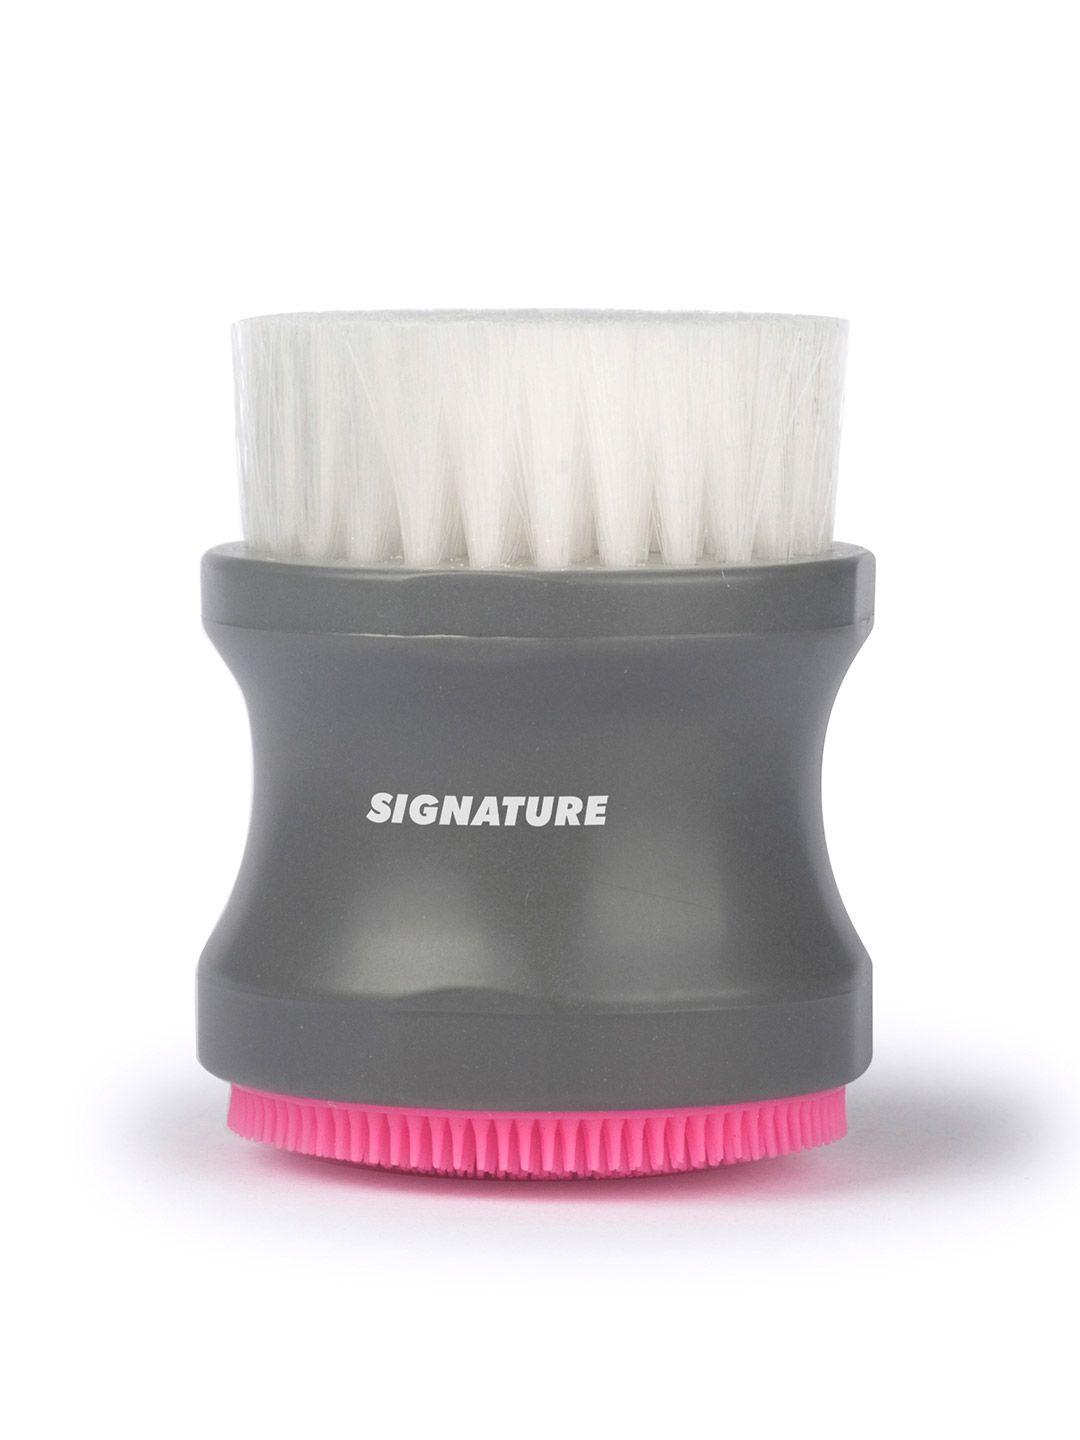 basicare-signature-compact-duo-facial-cleansing-brush